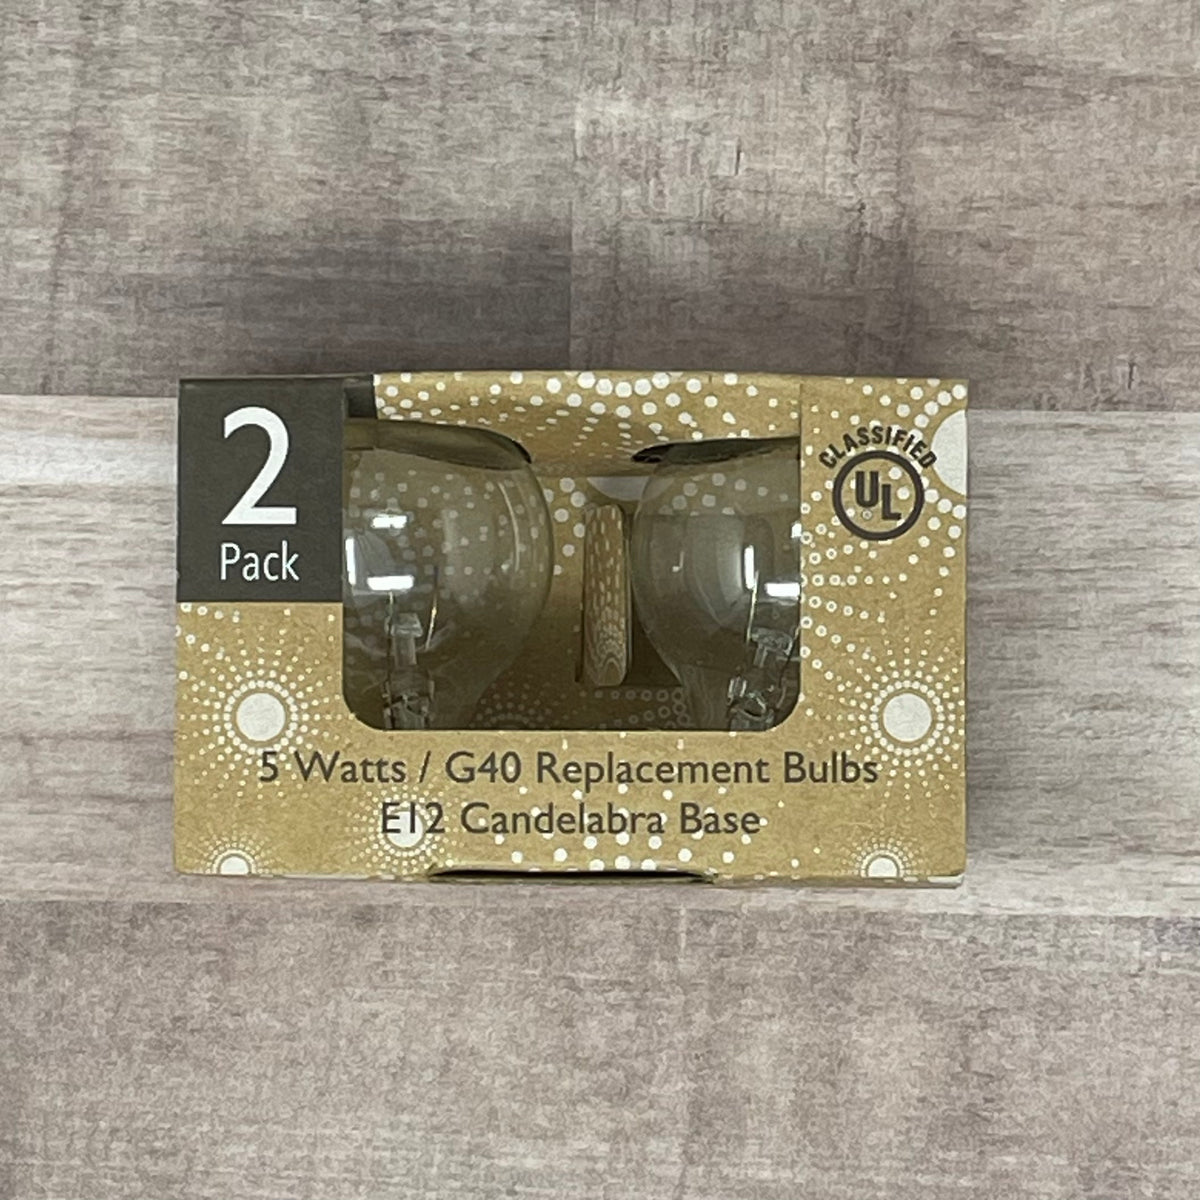 2 Pack Replacement Bulbs for String Lights